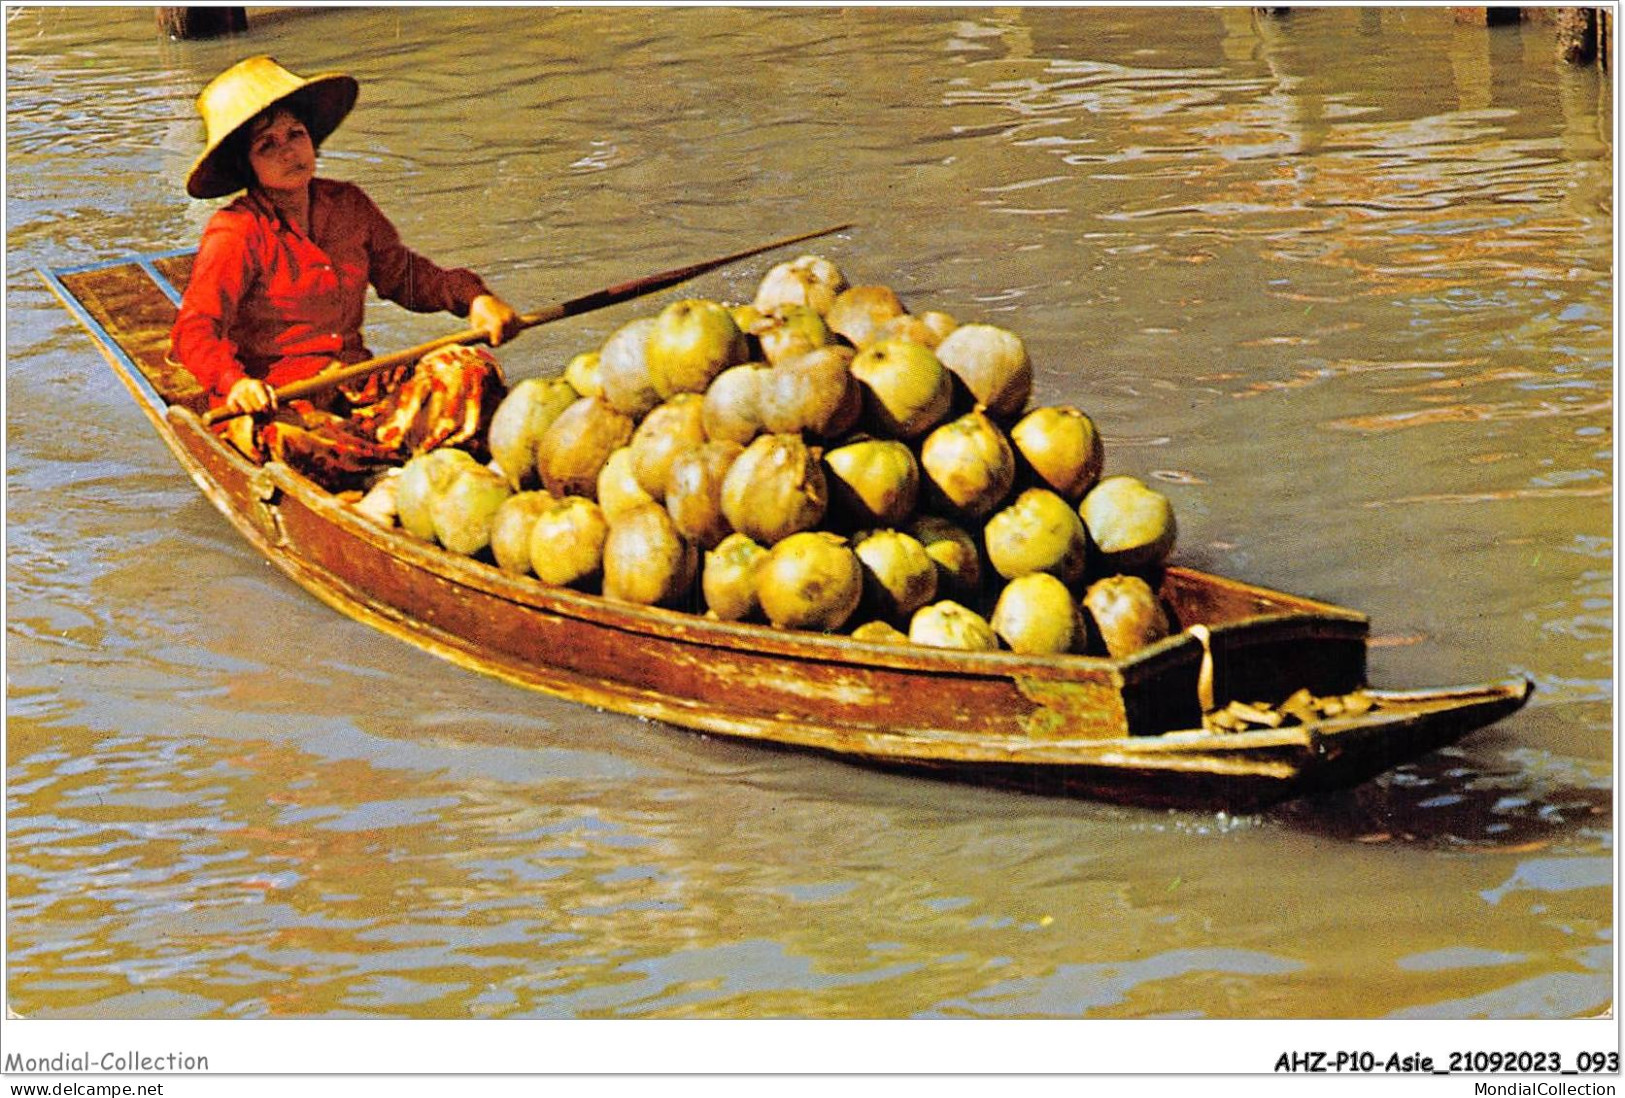 AHZP10-ASIE-0917 - THAI BOAT-VENDORS SELLING FRUITS AND VEGETABLES TO THE DWELLERS BY THE SIDES OF KHLONGS - Thaïland